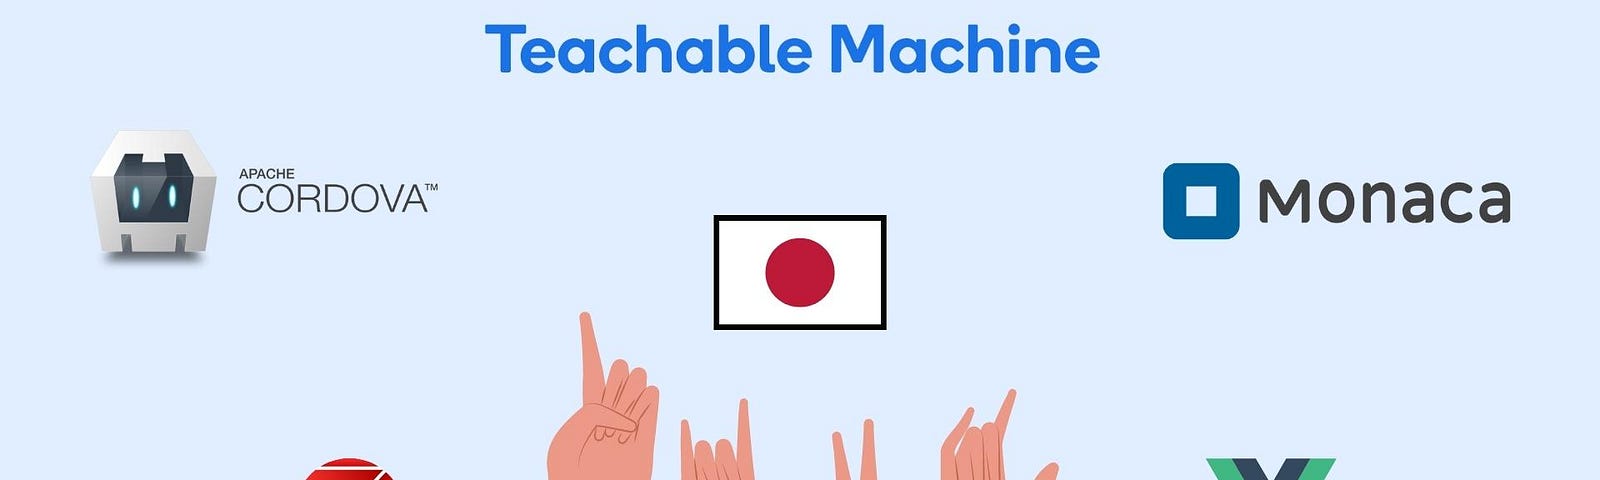 Create a simple Sign Language Recognition App using Teachable Machine, Monaca, Vue.js, Cordova and Framework7